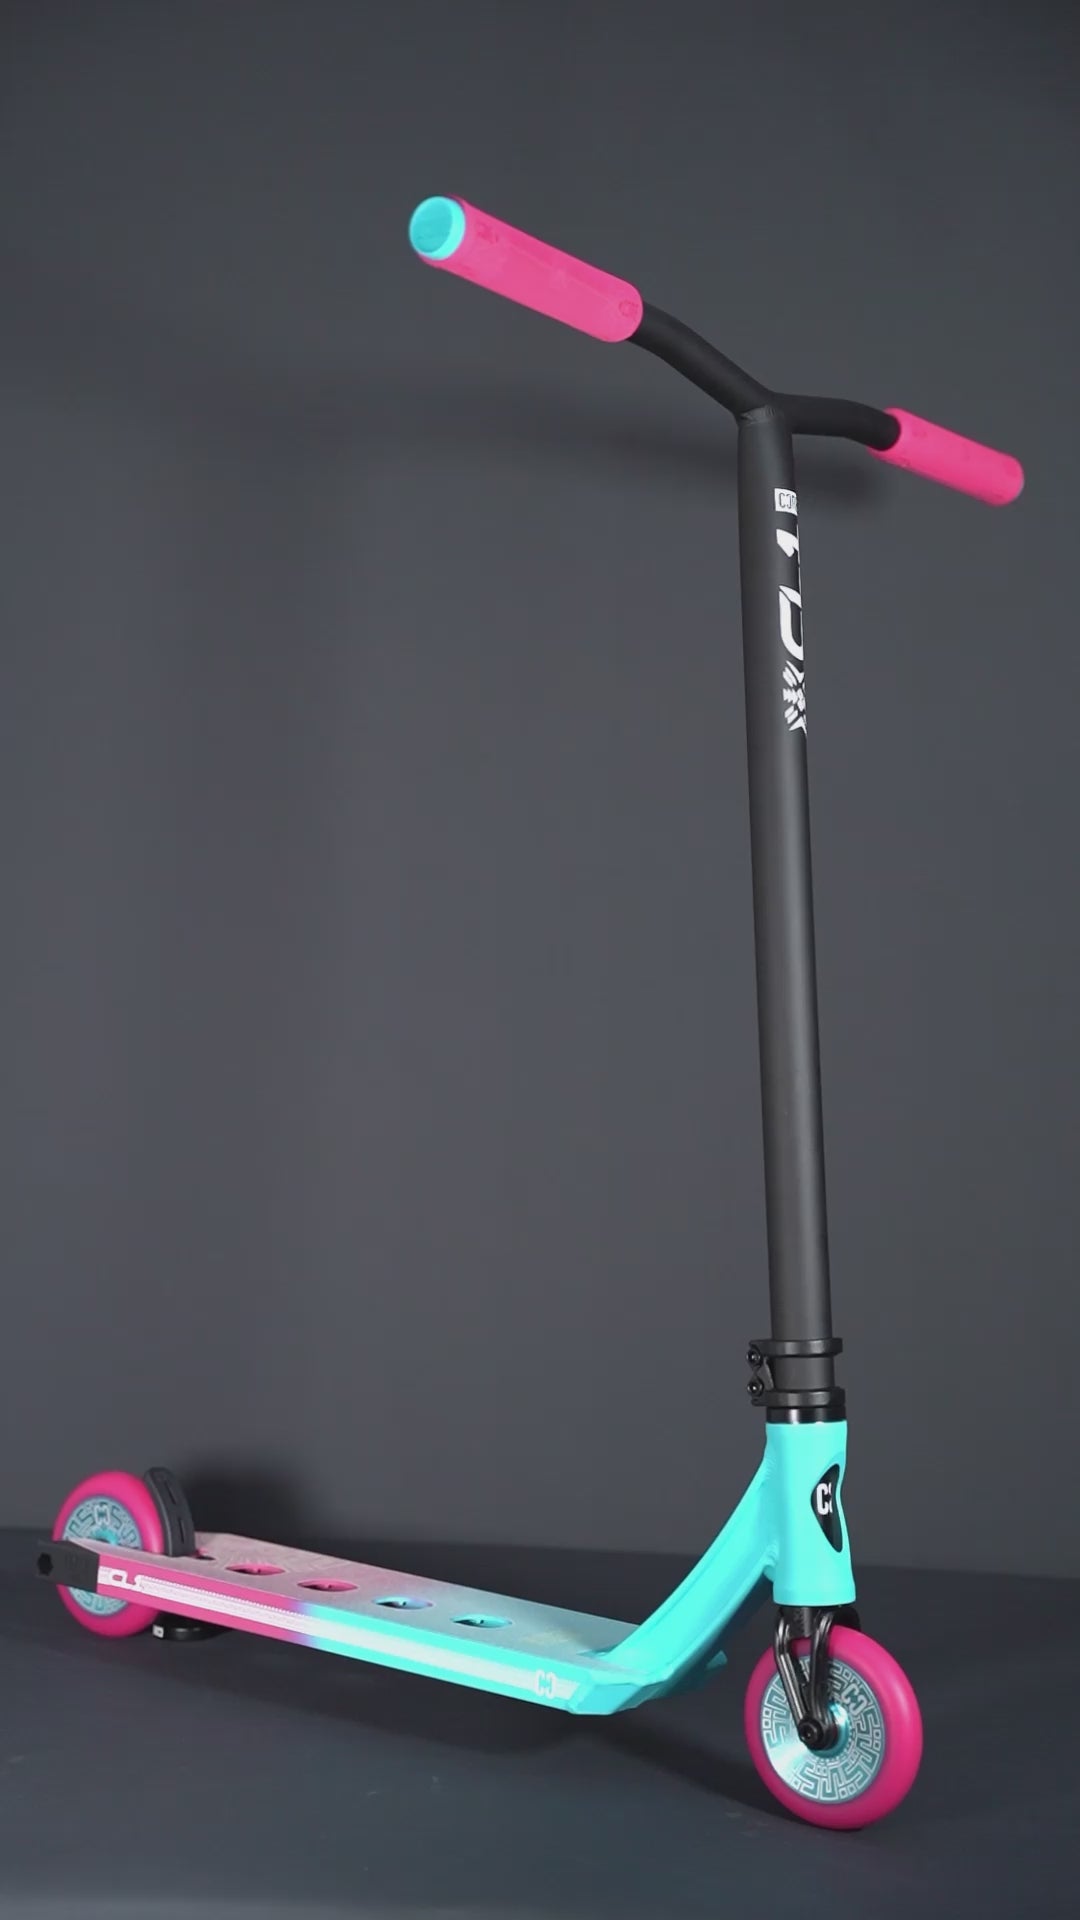 CORE CL1 Complete Stunt Scooter Pink & Teal I Adult Stunt Scooter Video